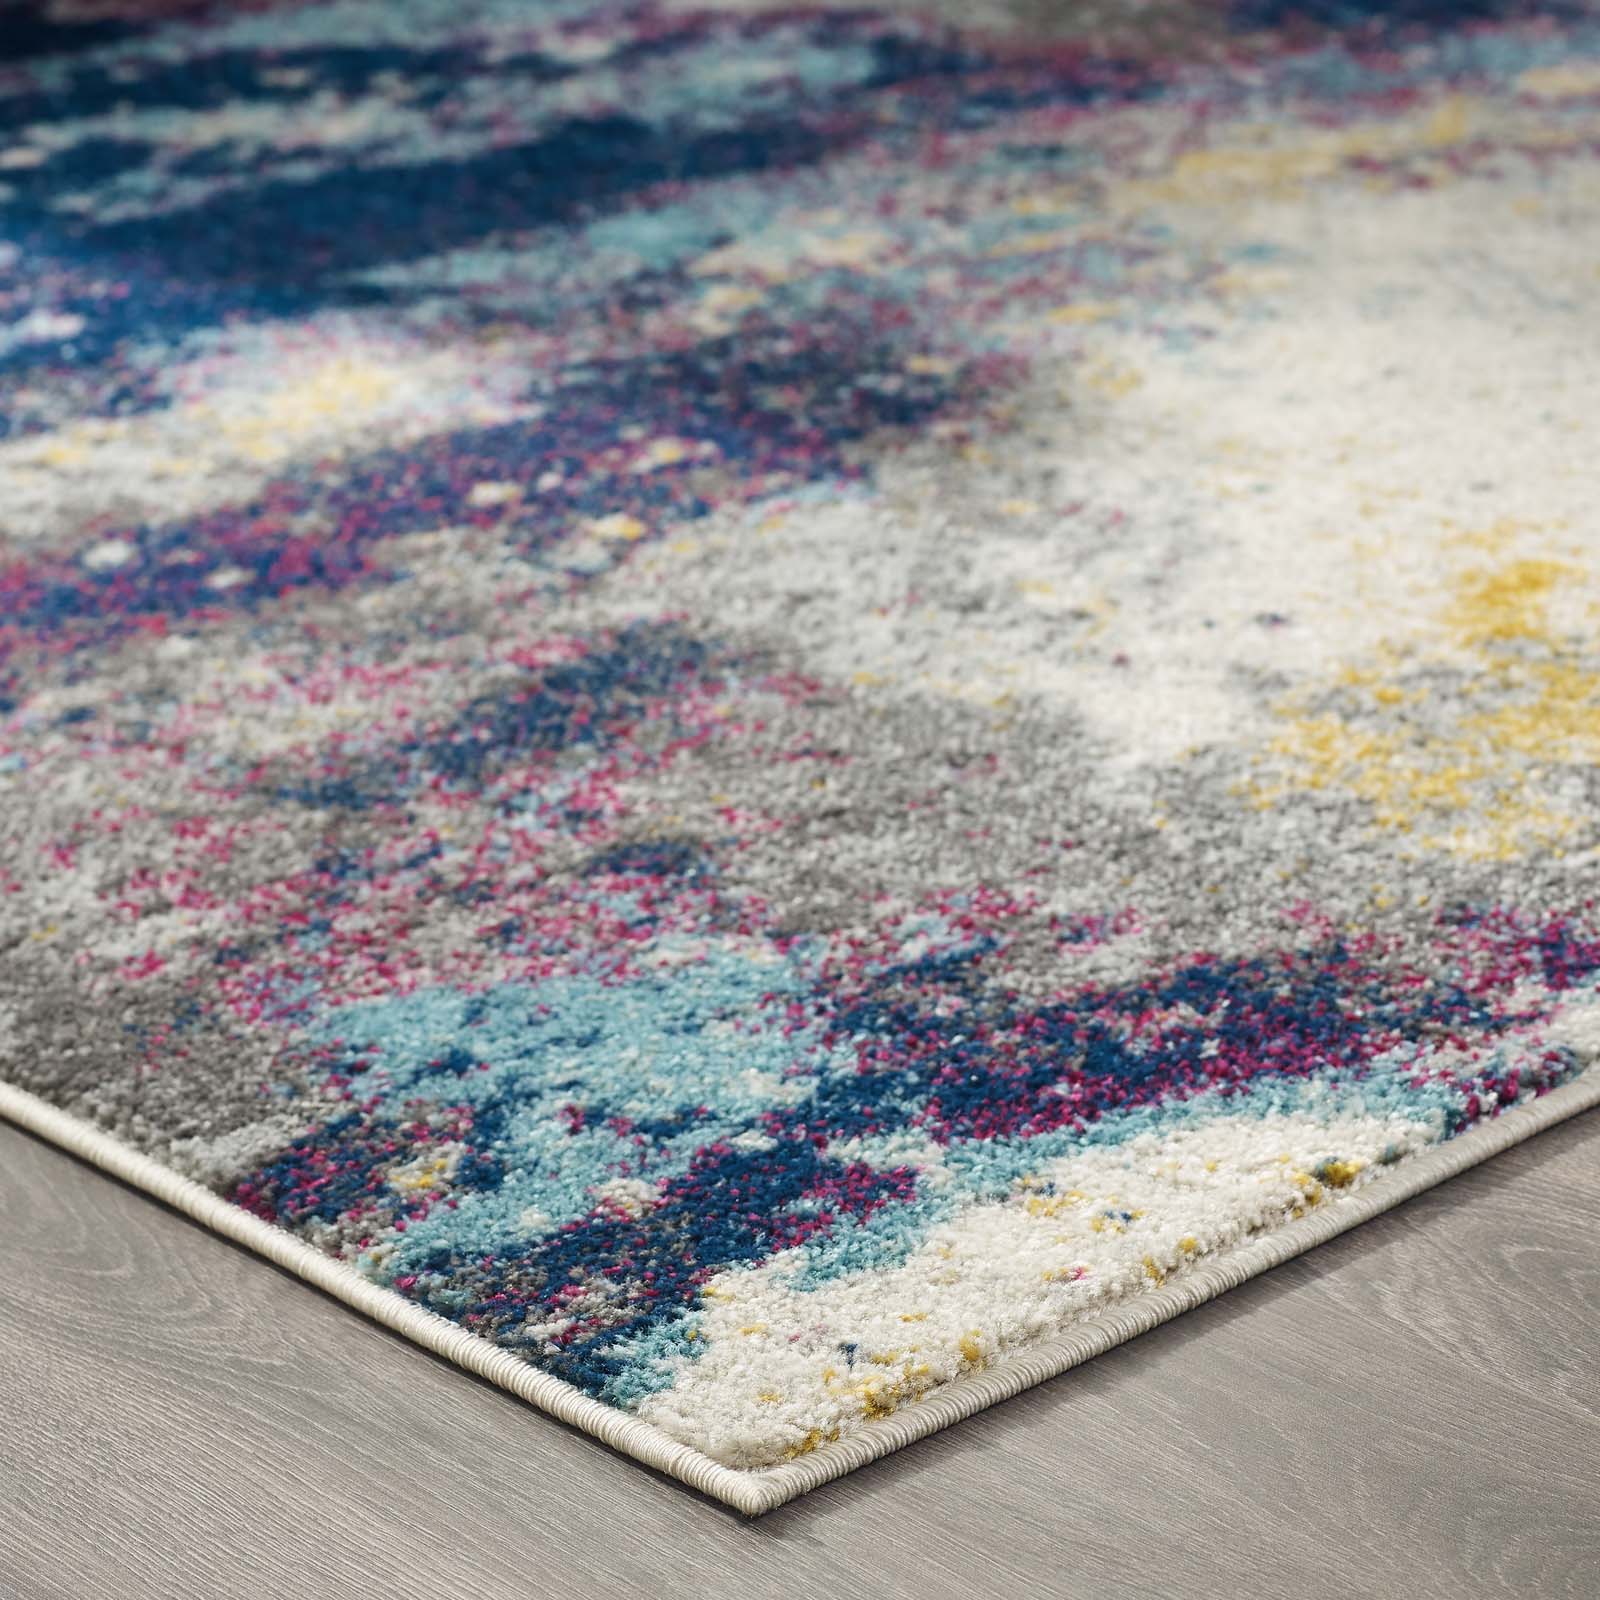 Explore our collection to find the Artistry Amedeo Abstract In Grey & Multi  Rug Cheapest Rugs Online you require